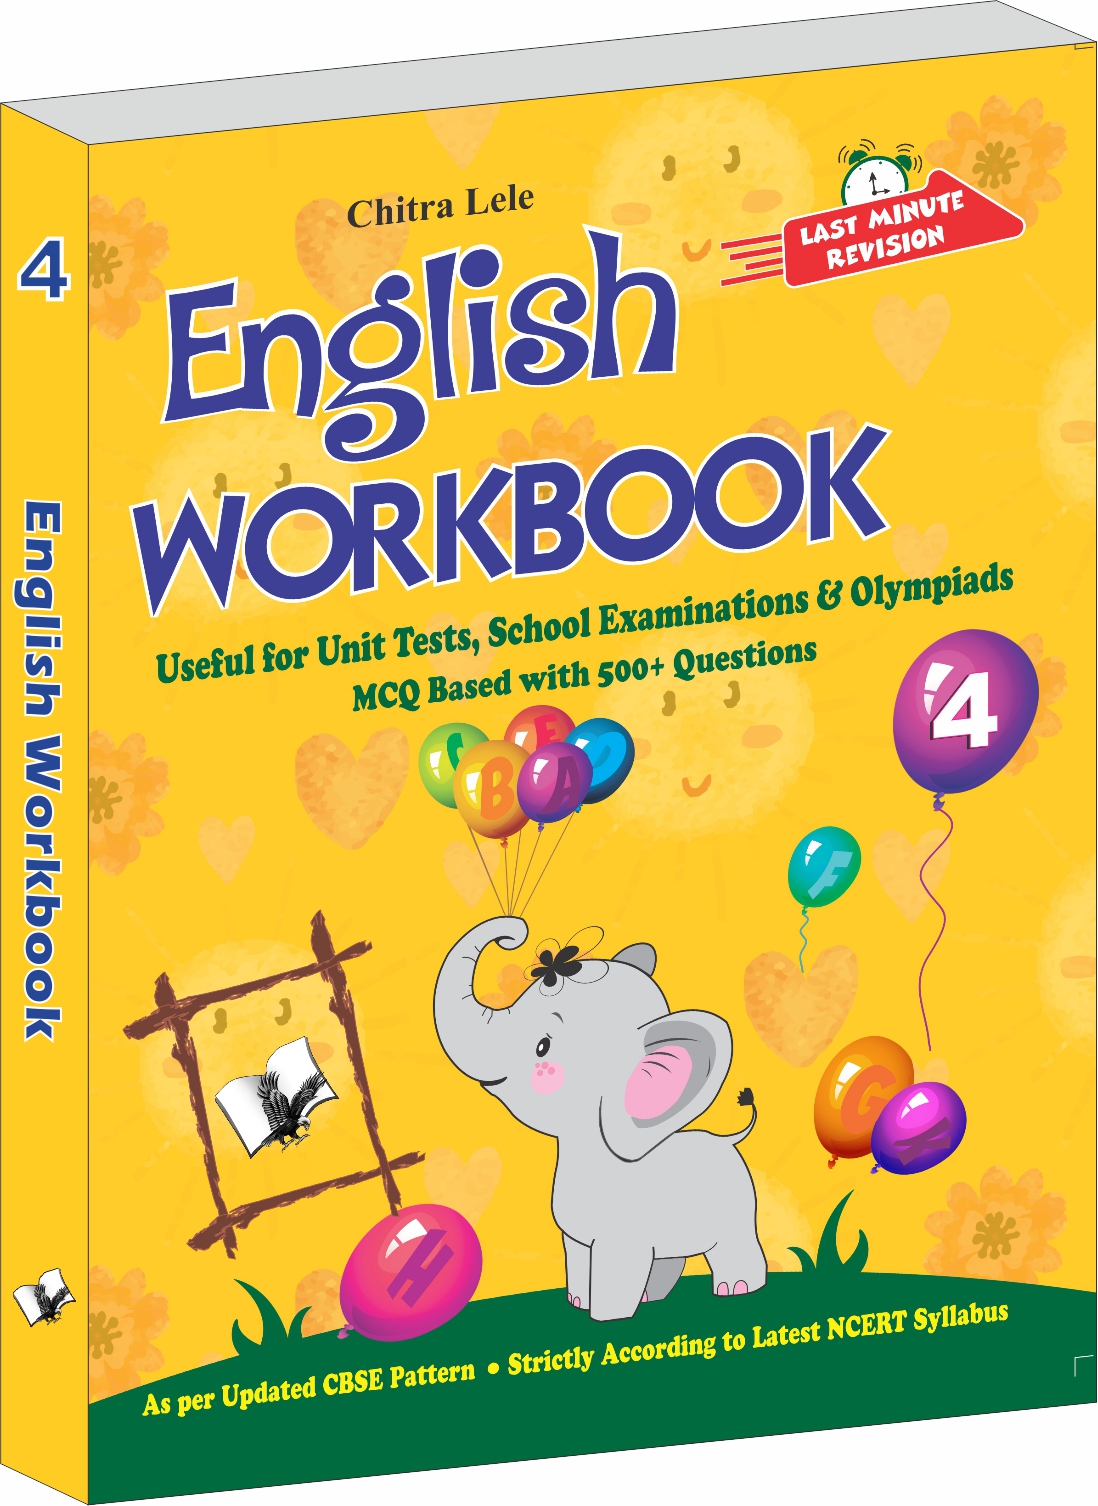 English Workbook Class 4-Useful for Unit Tests, School Examinations & Olympiads